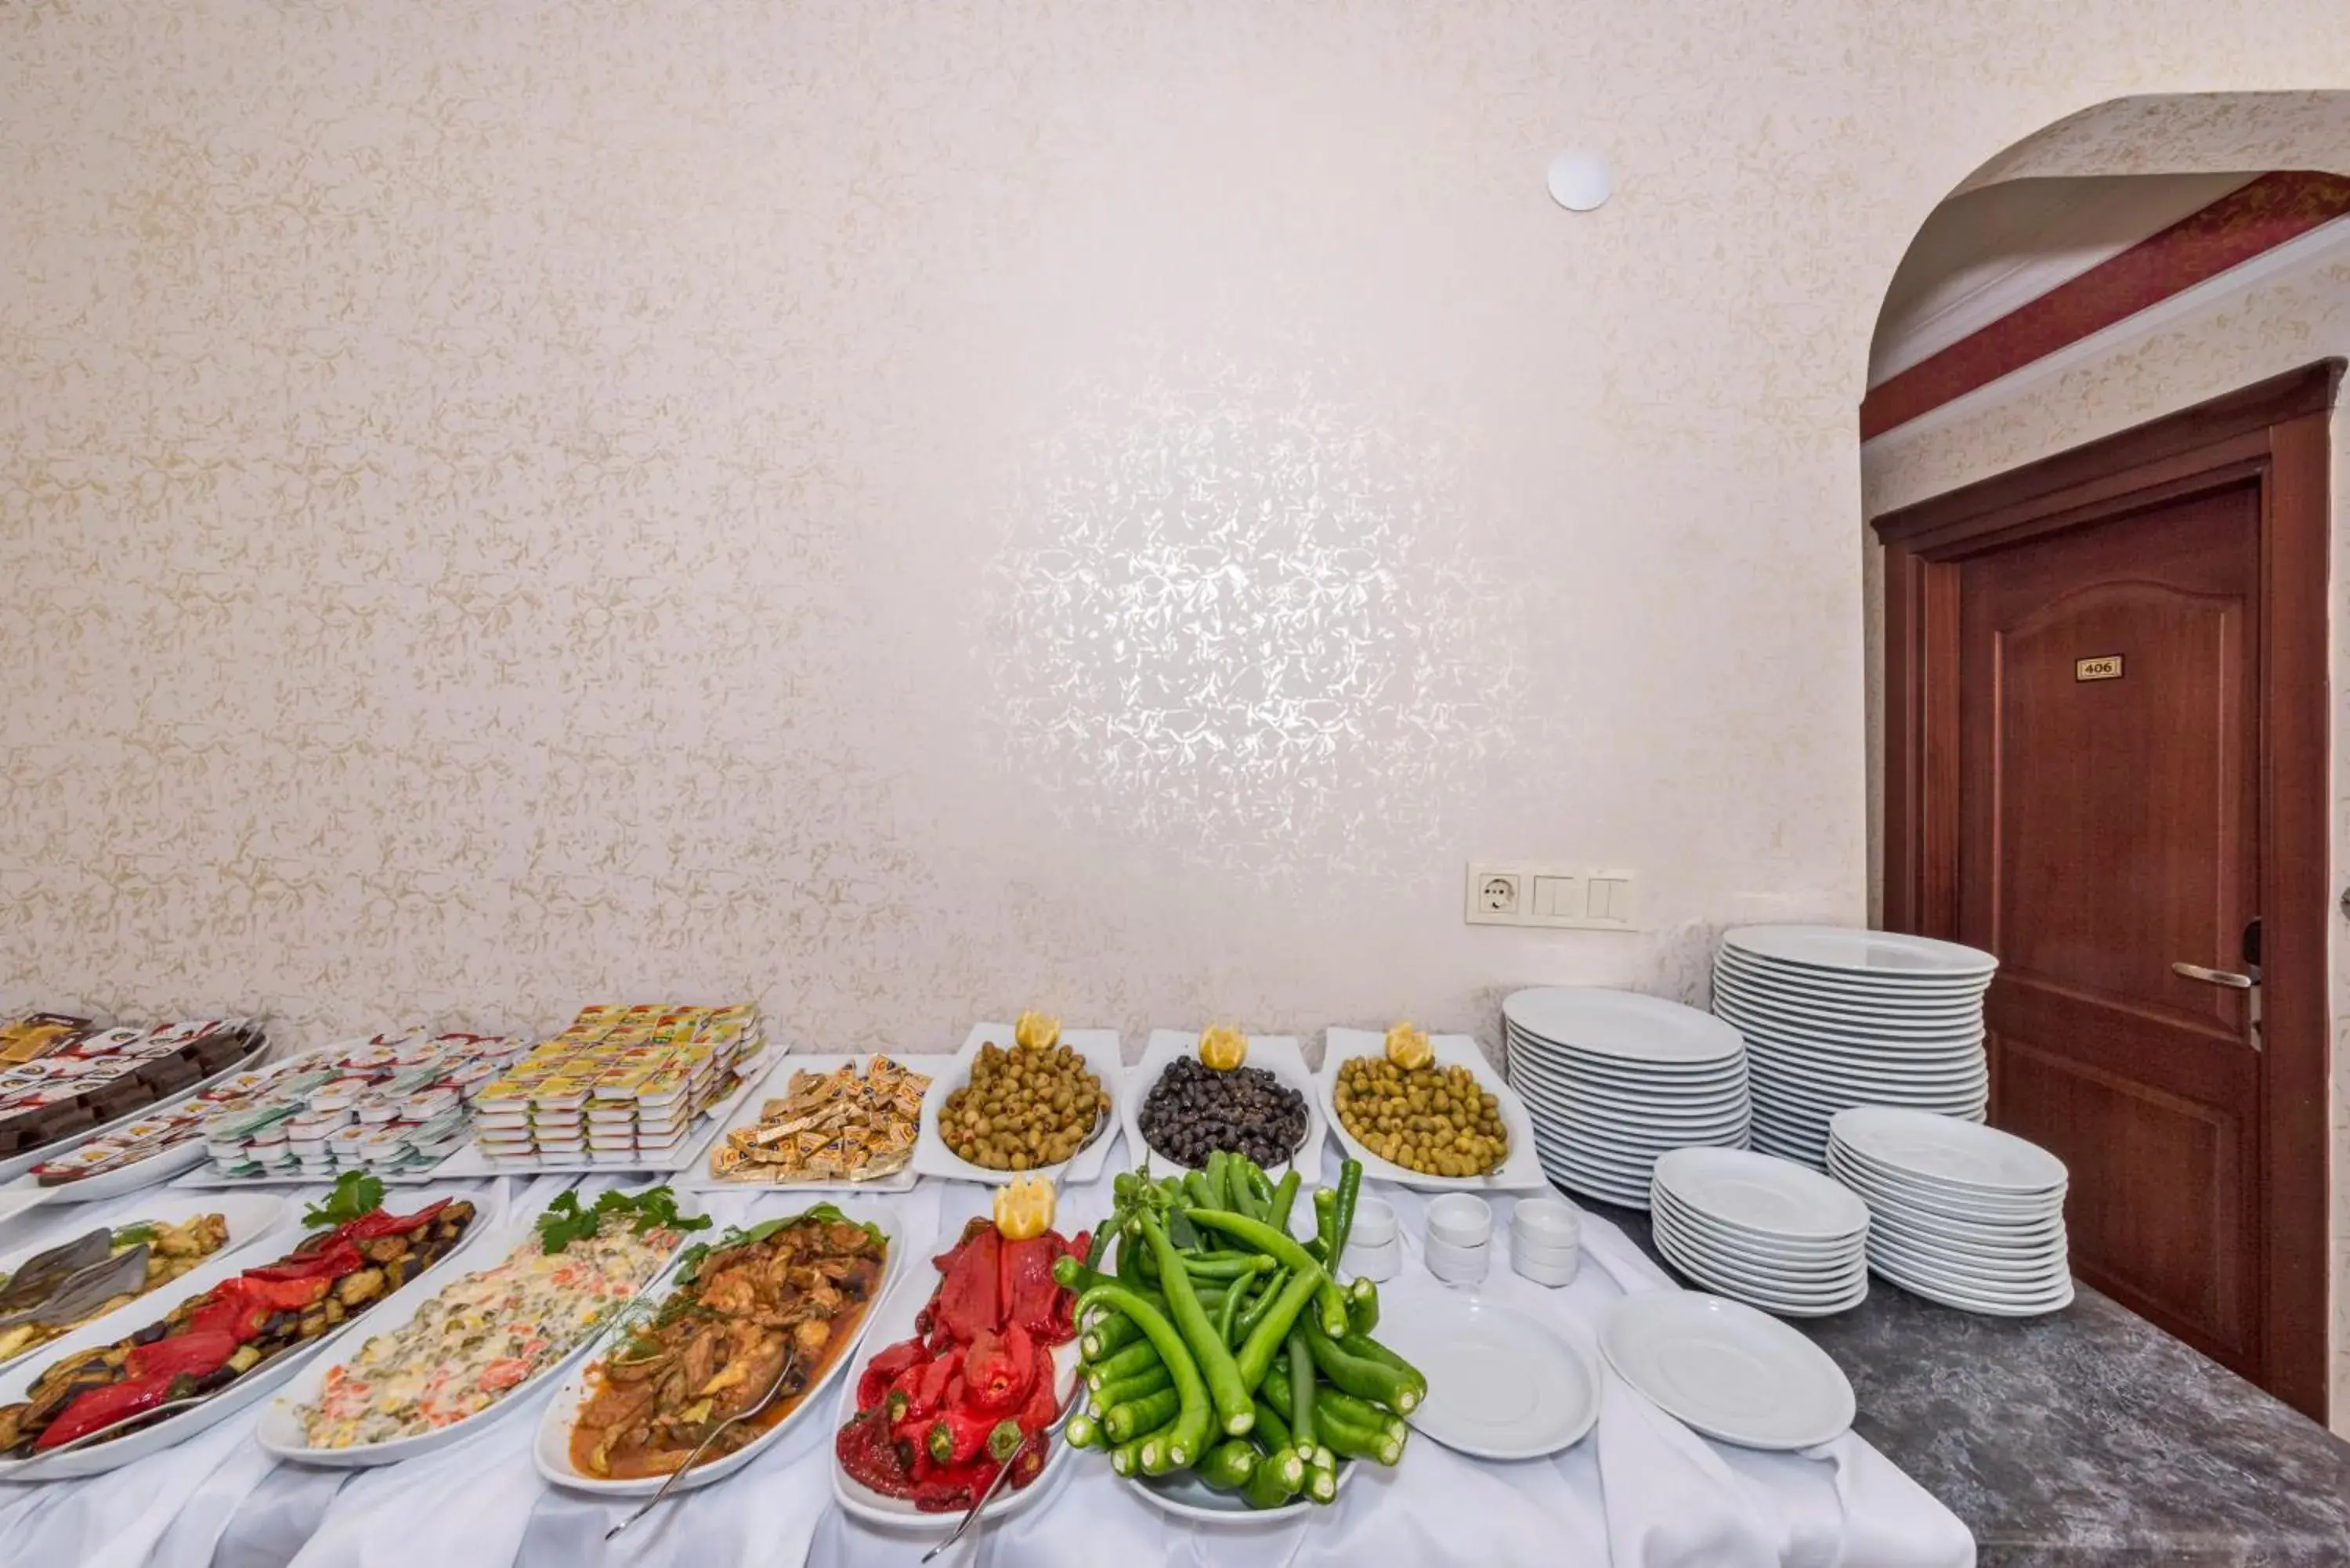 Food and drinks in Cihangir Palace Hotel